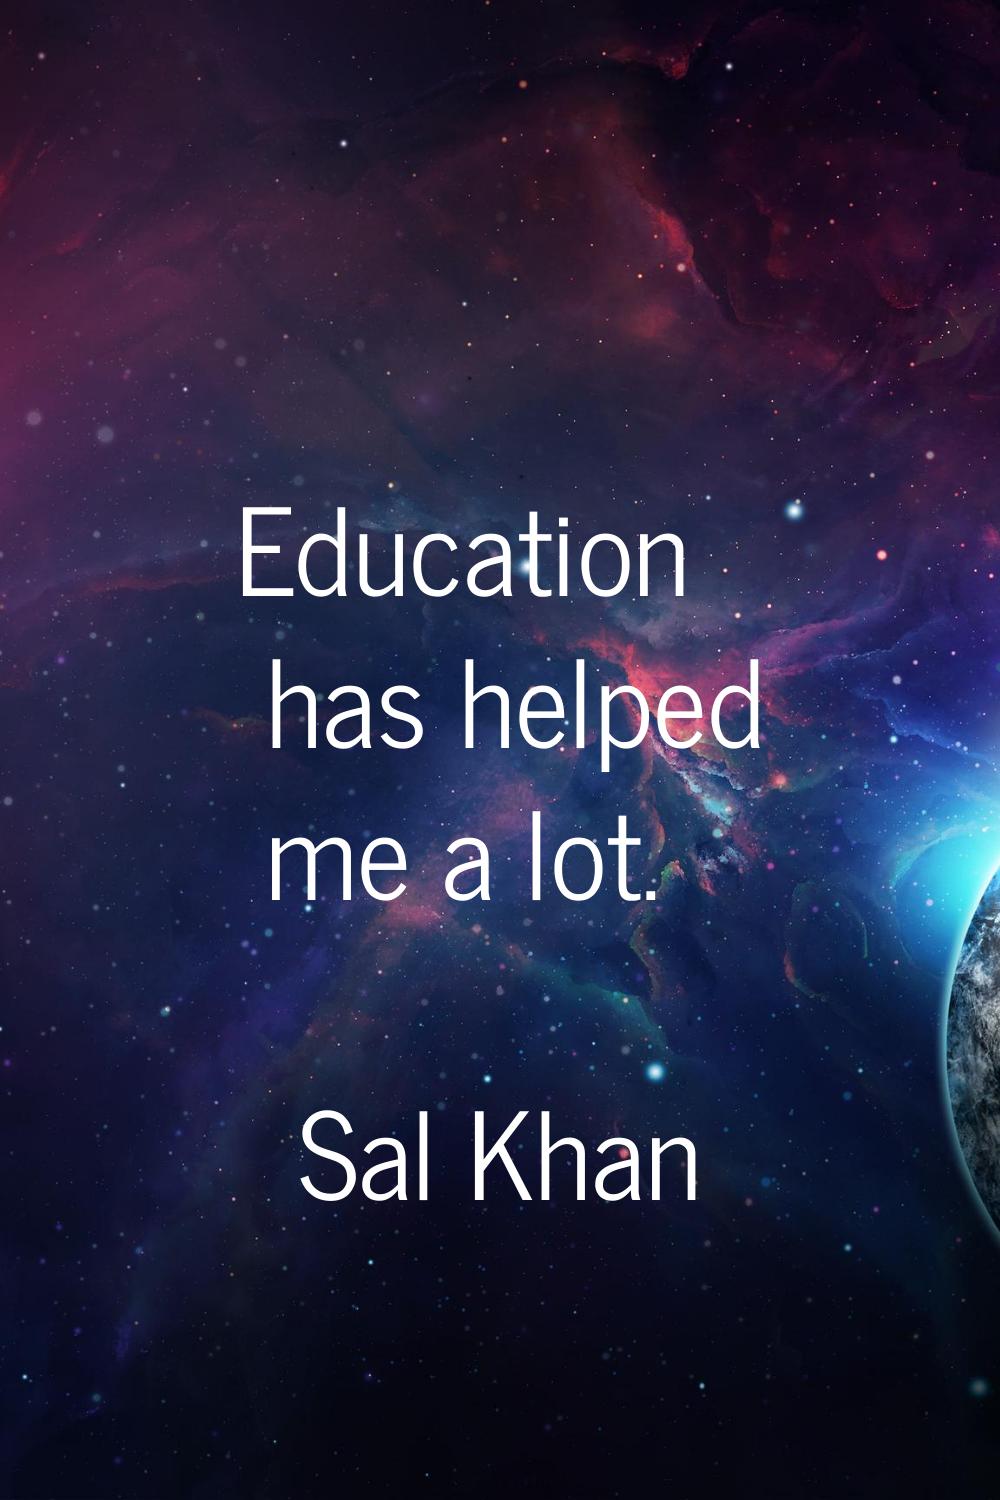 Education has helped me a lot.